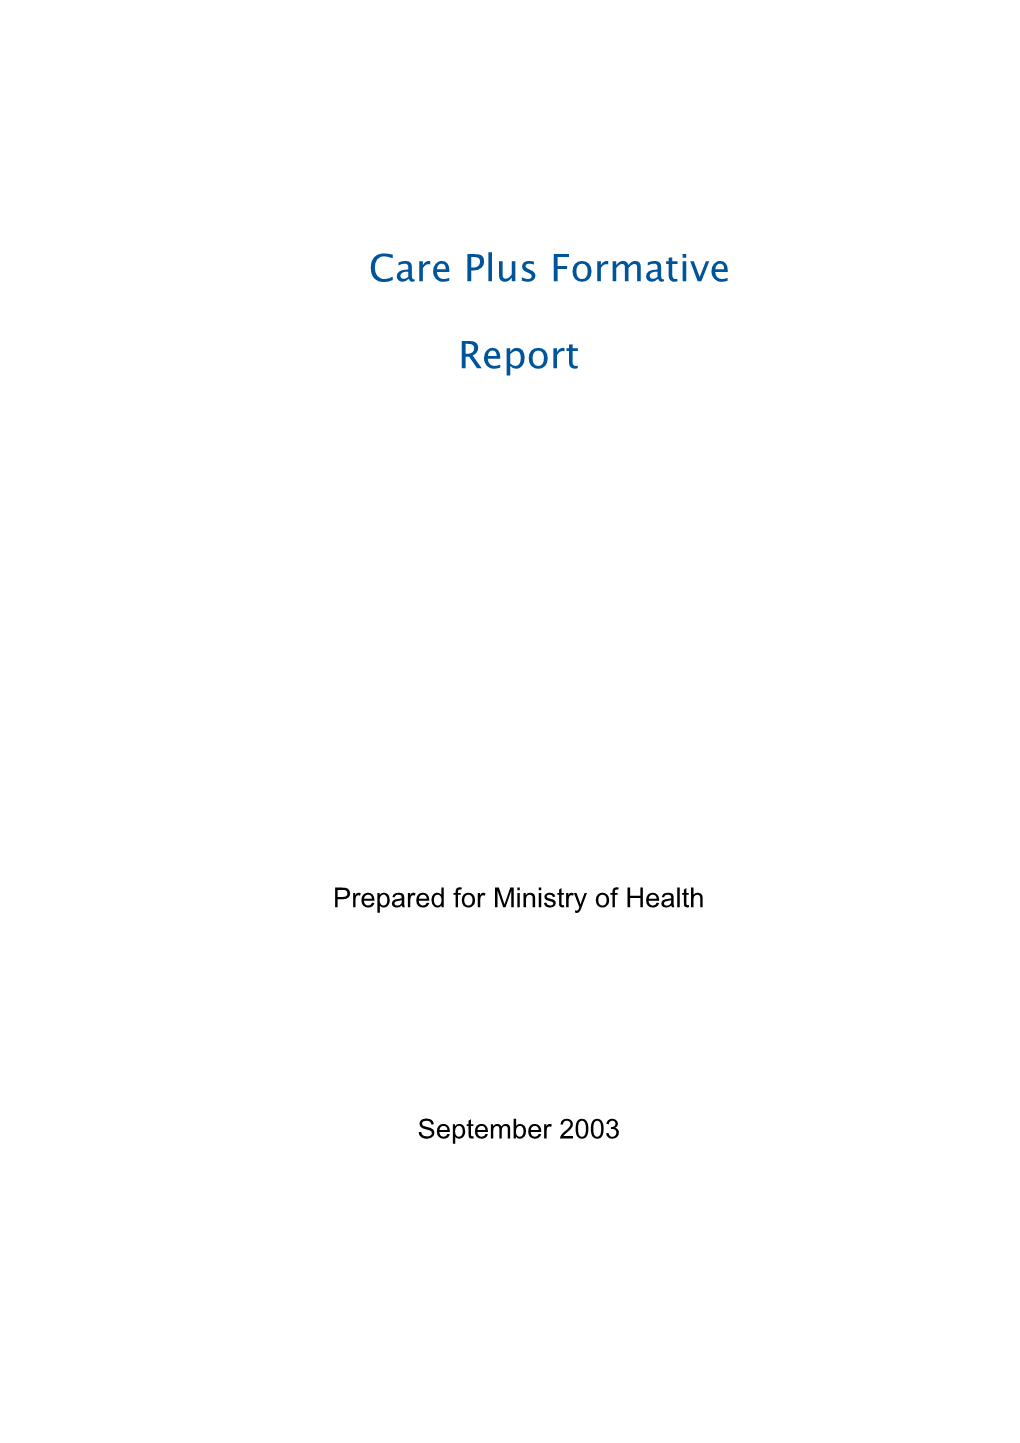 Care Plus Formative Report September 2003